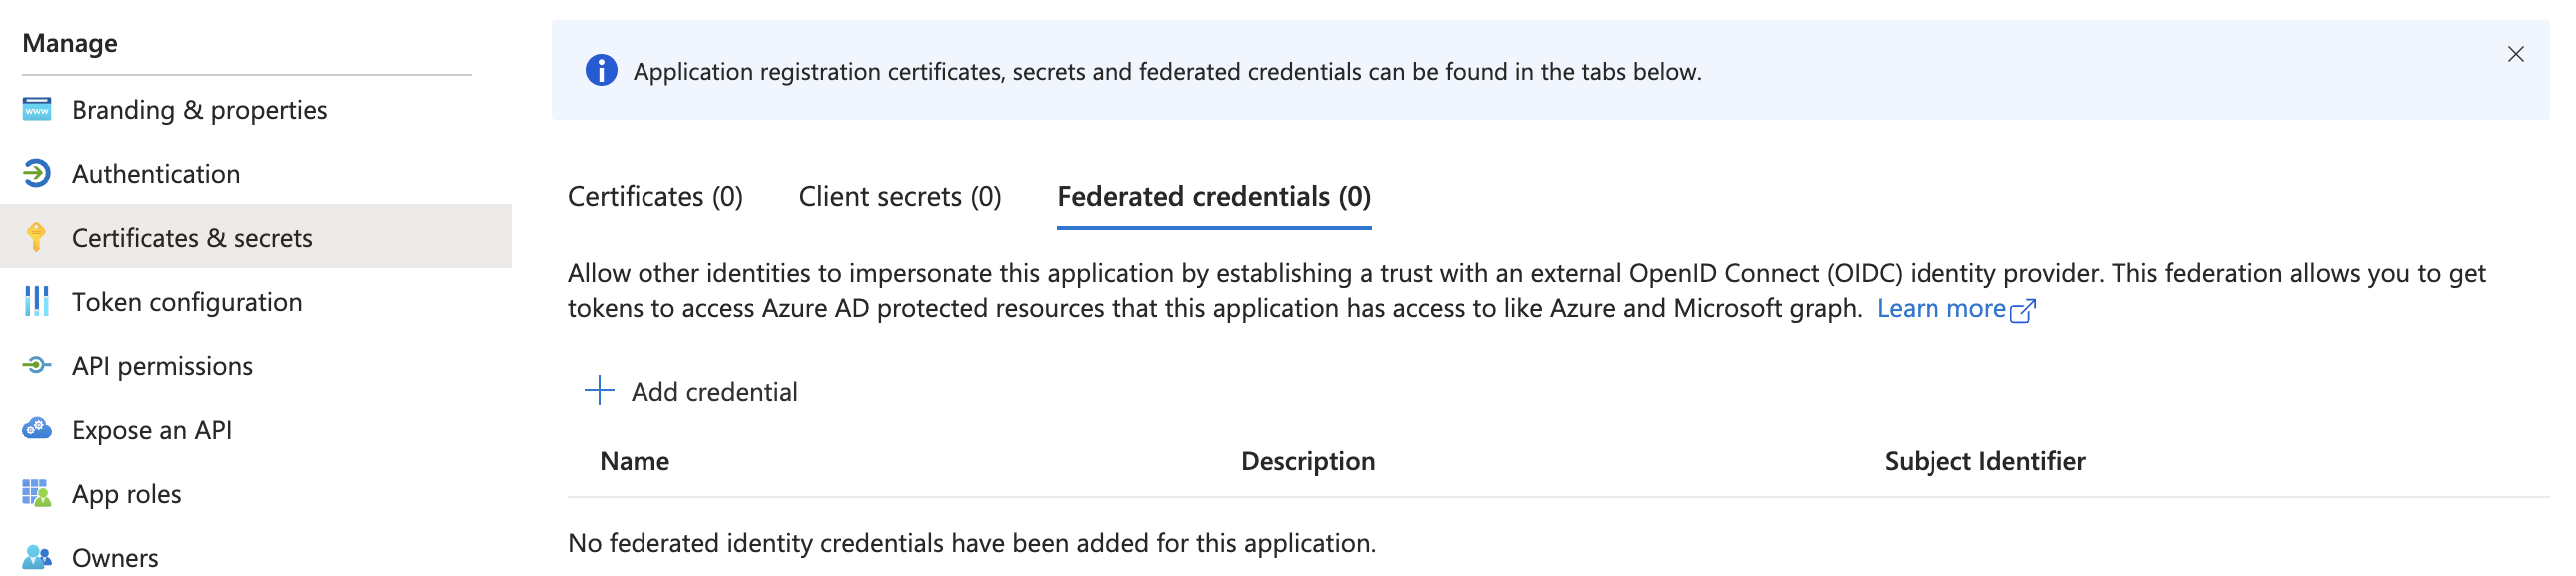 Certificates & secrets section of the app